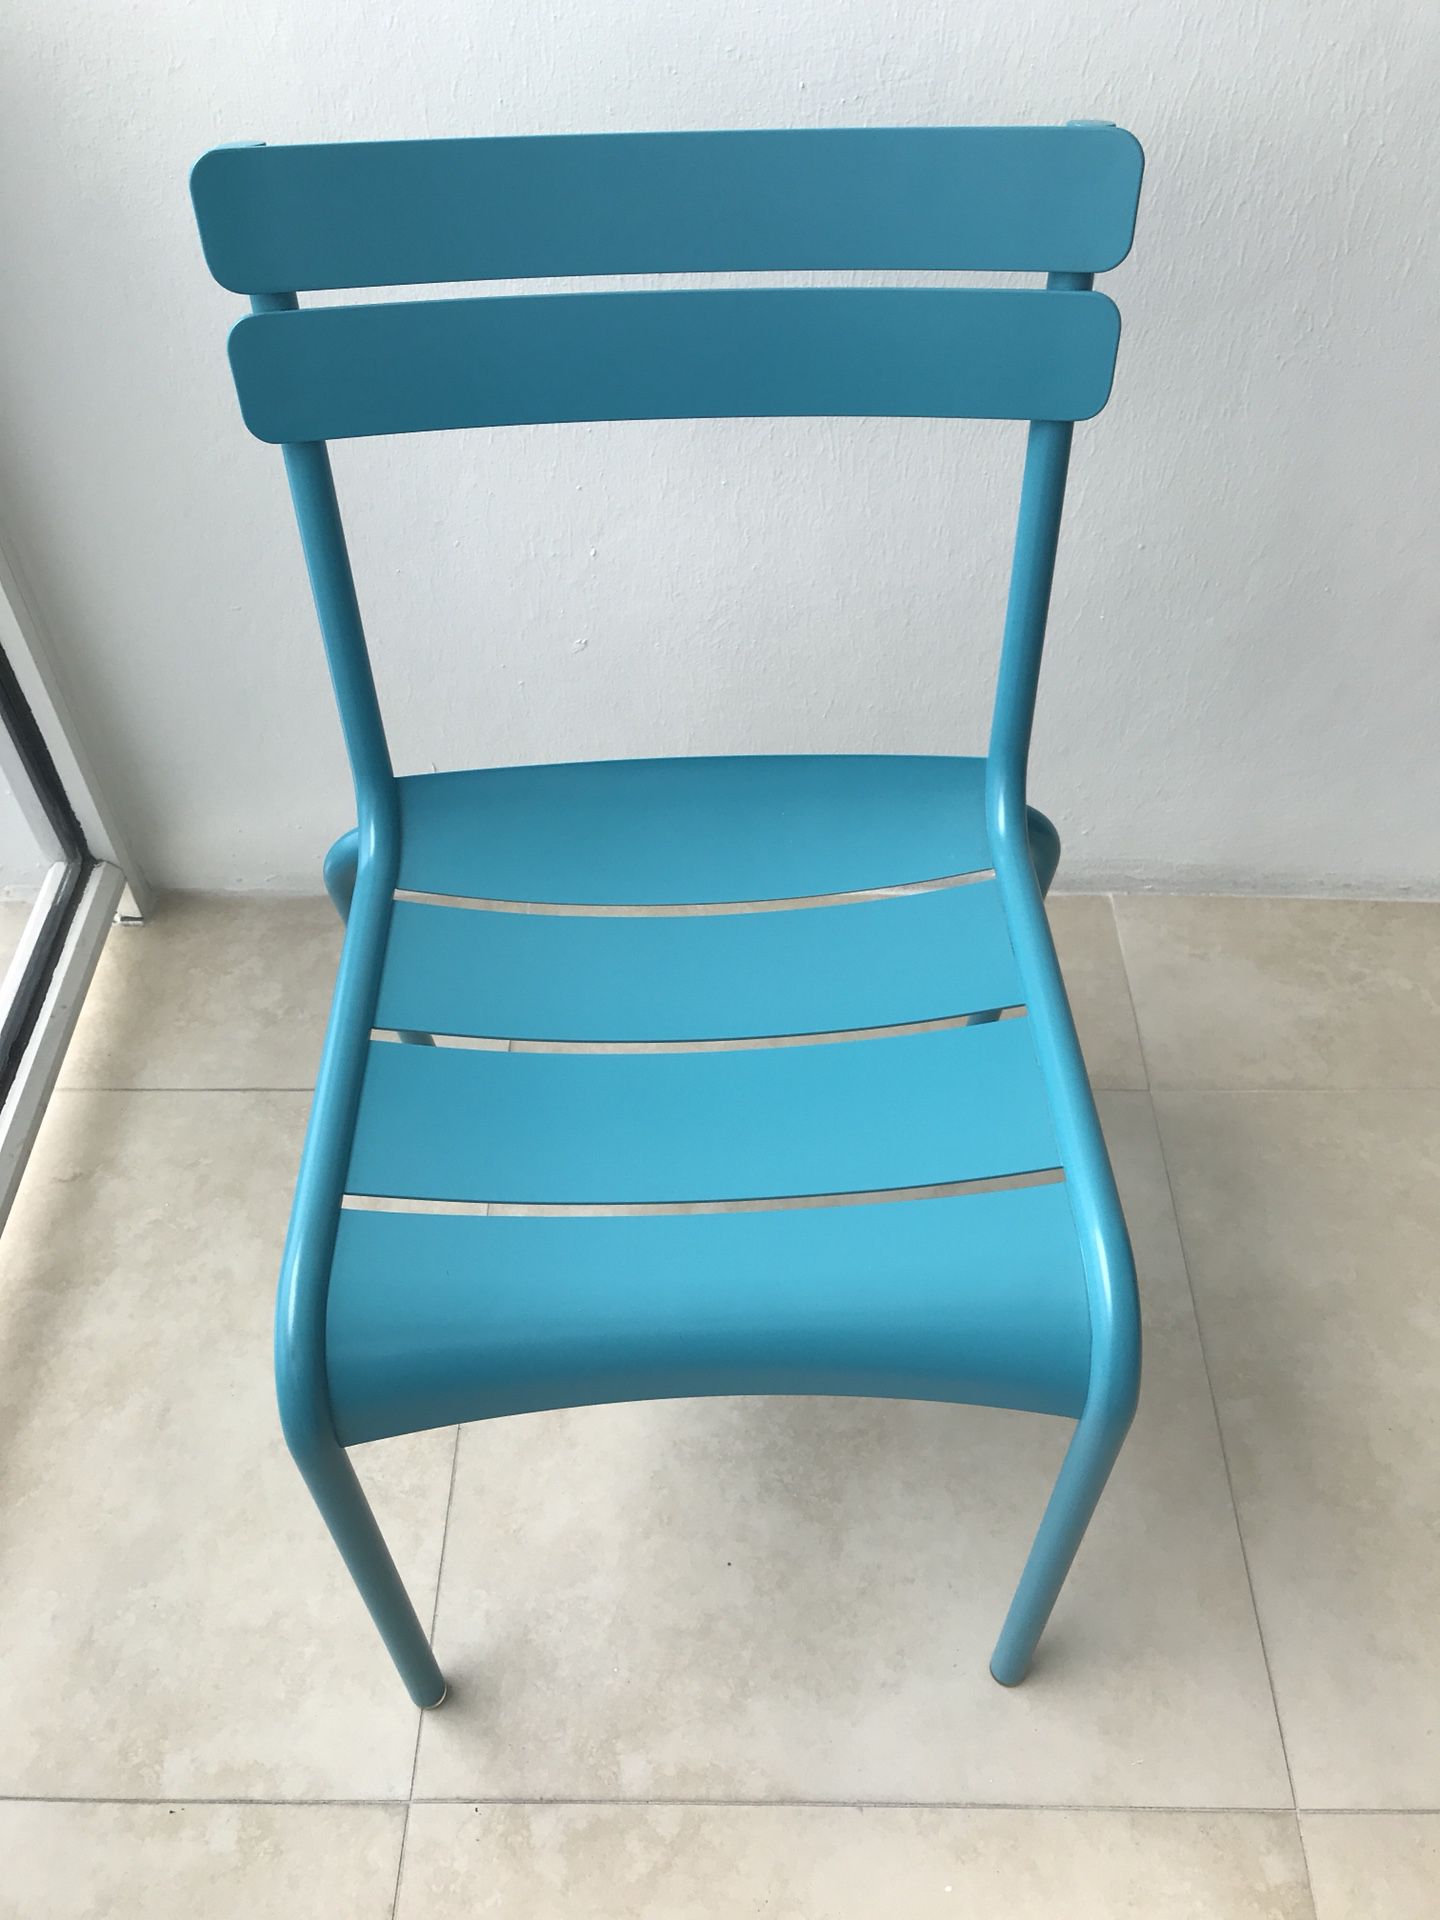 Outdoor Fermob Luxembourg table and chair set for Sale Miami Beach, - OfferUp